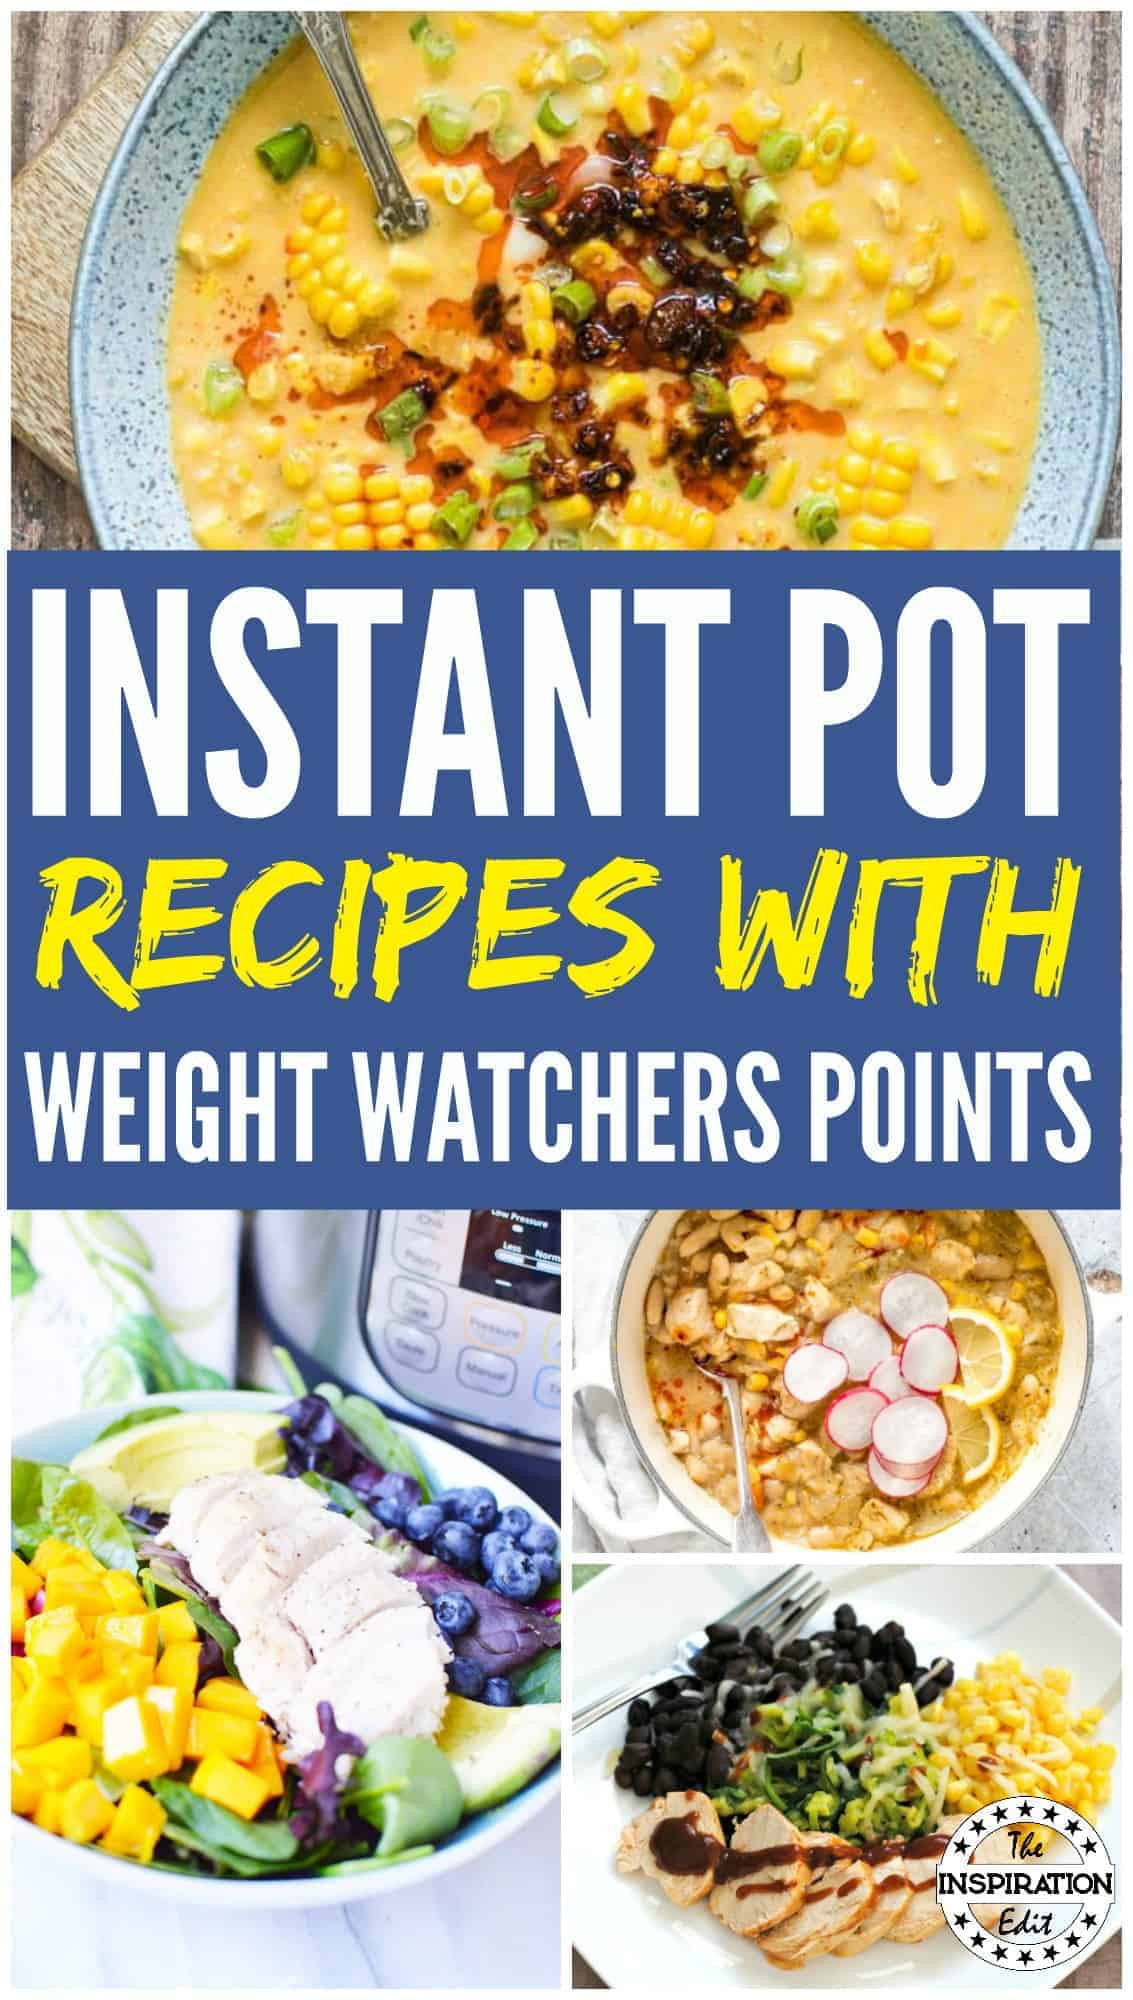 Our 15 Weight Watchers Instant Pot Recipes
 Ever